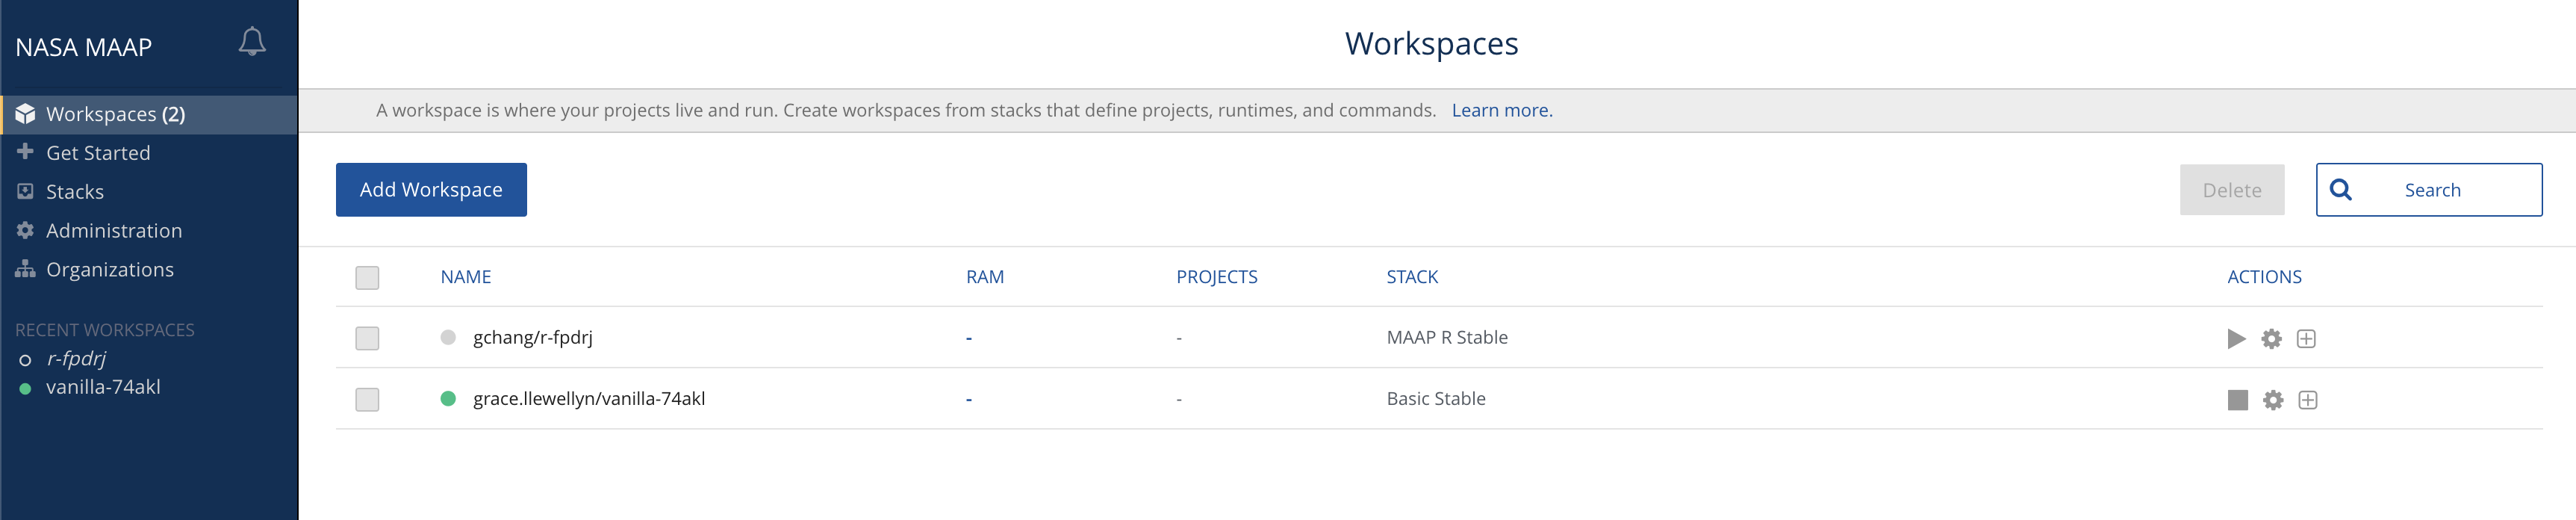 share workspace select